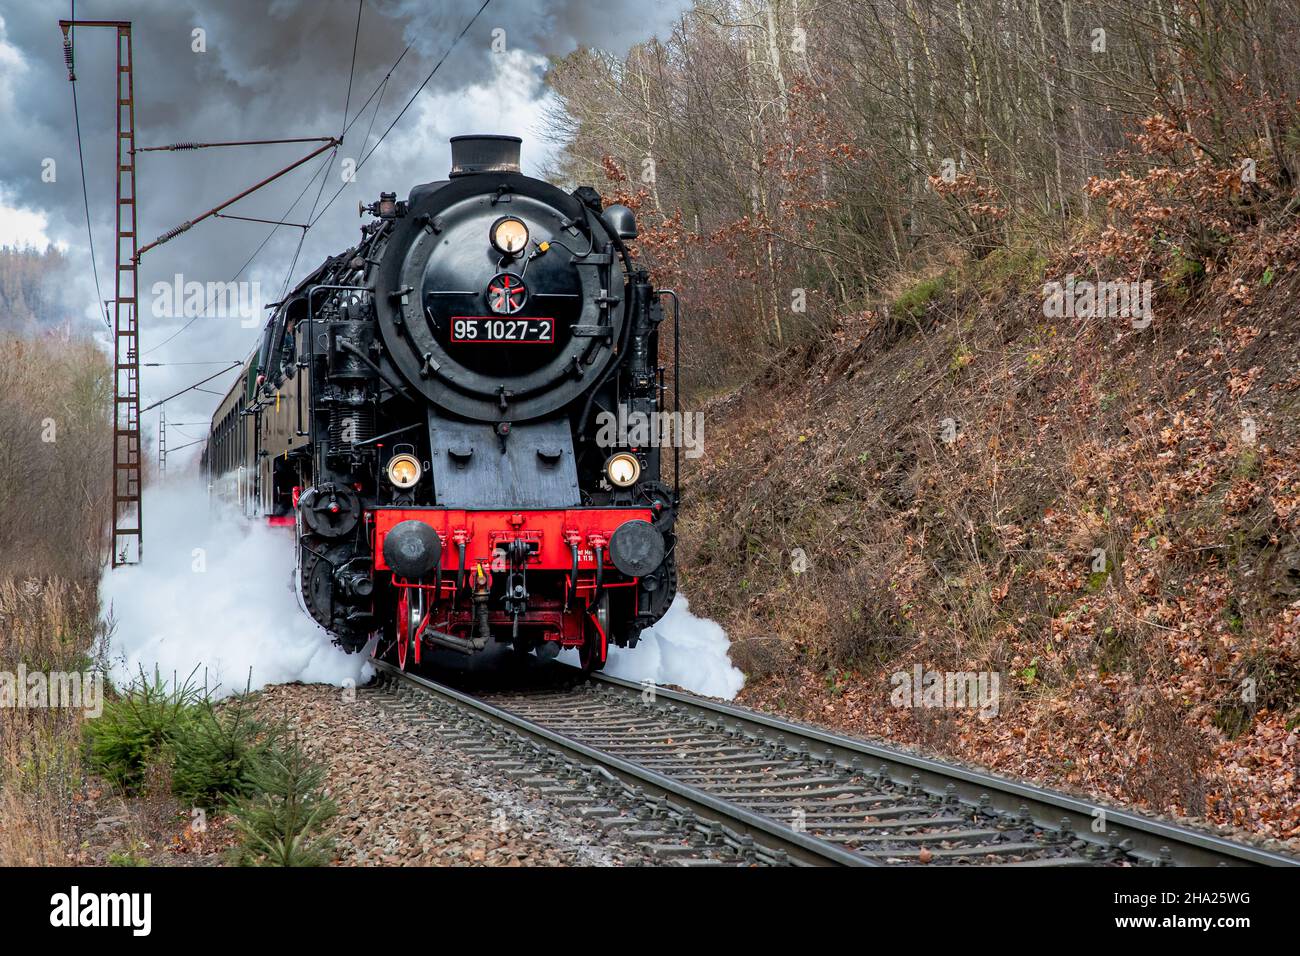 Page 2 - Eisenbahn Dampflok High Resolution Stock Photography and Images -  Alamy